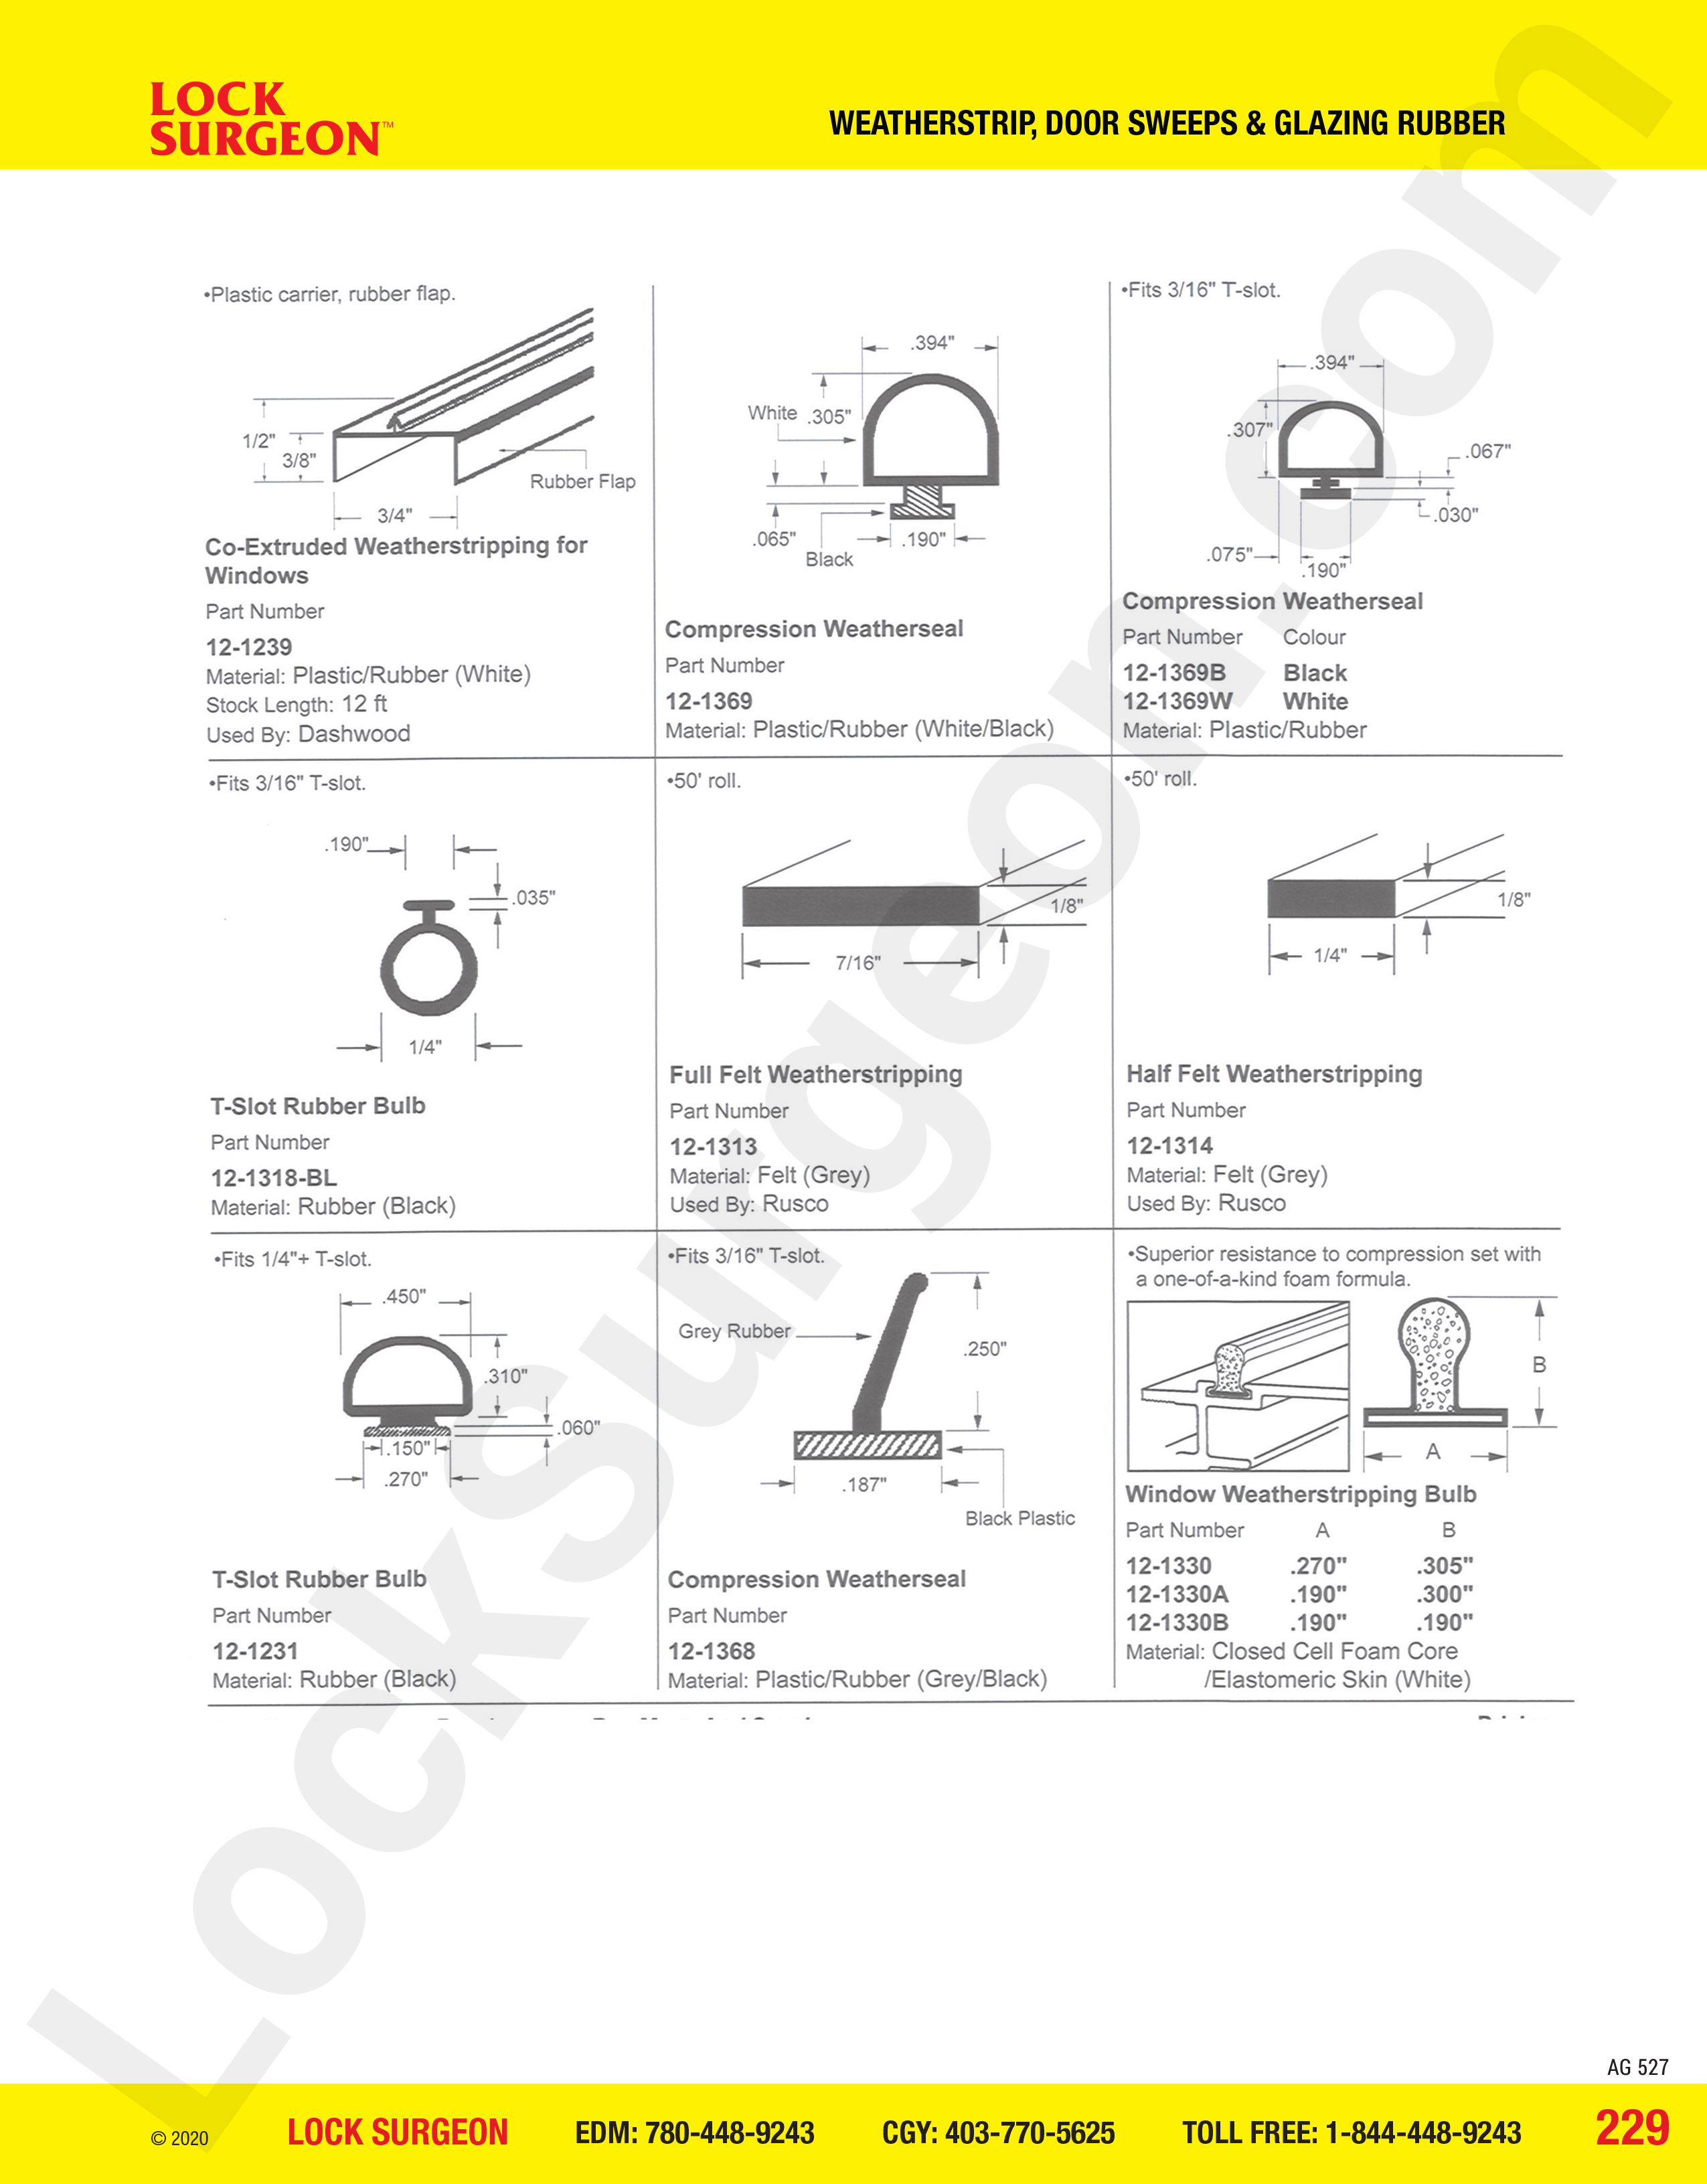 Acheson weatherstrip door sweeps and glazing rubber weatherseal and bulb parts